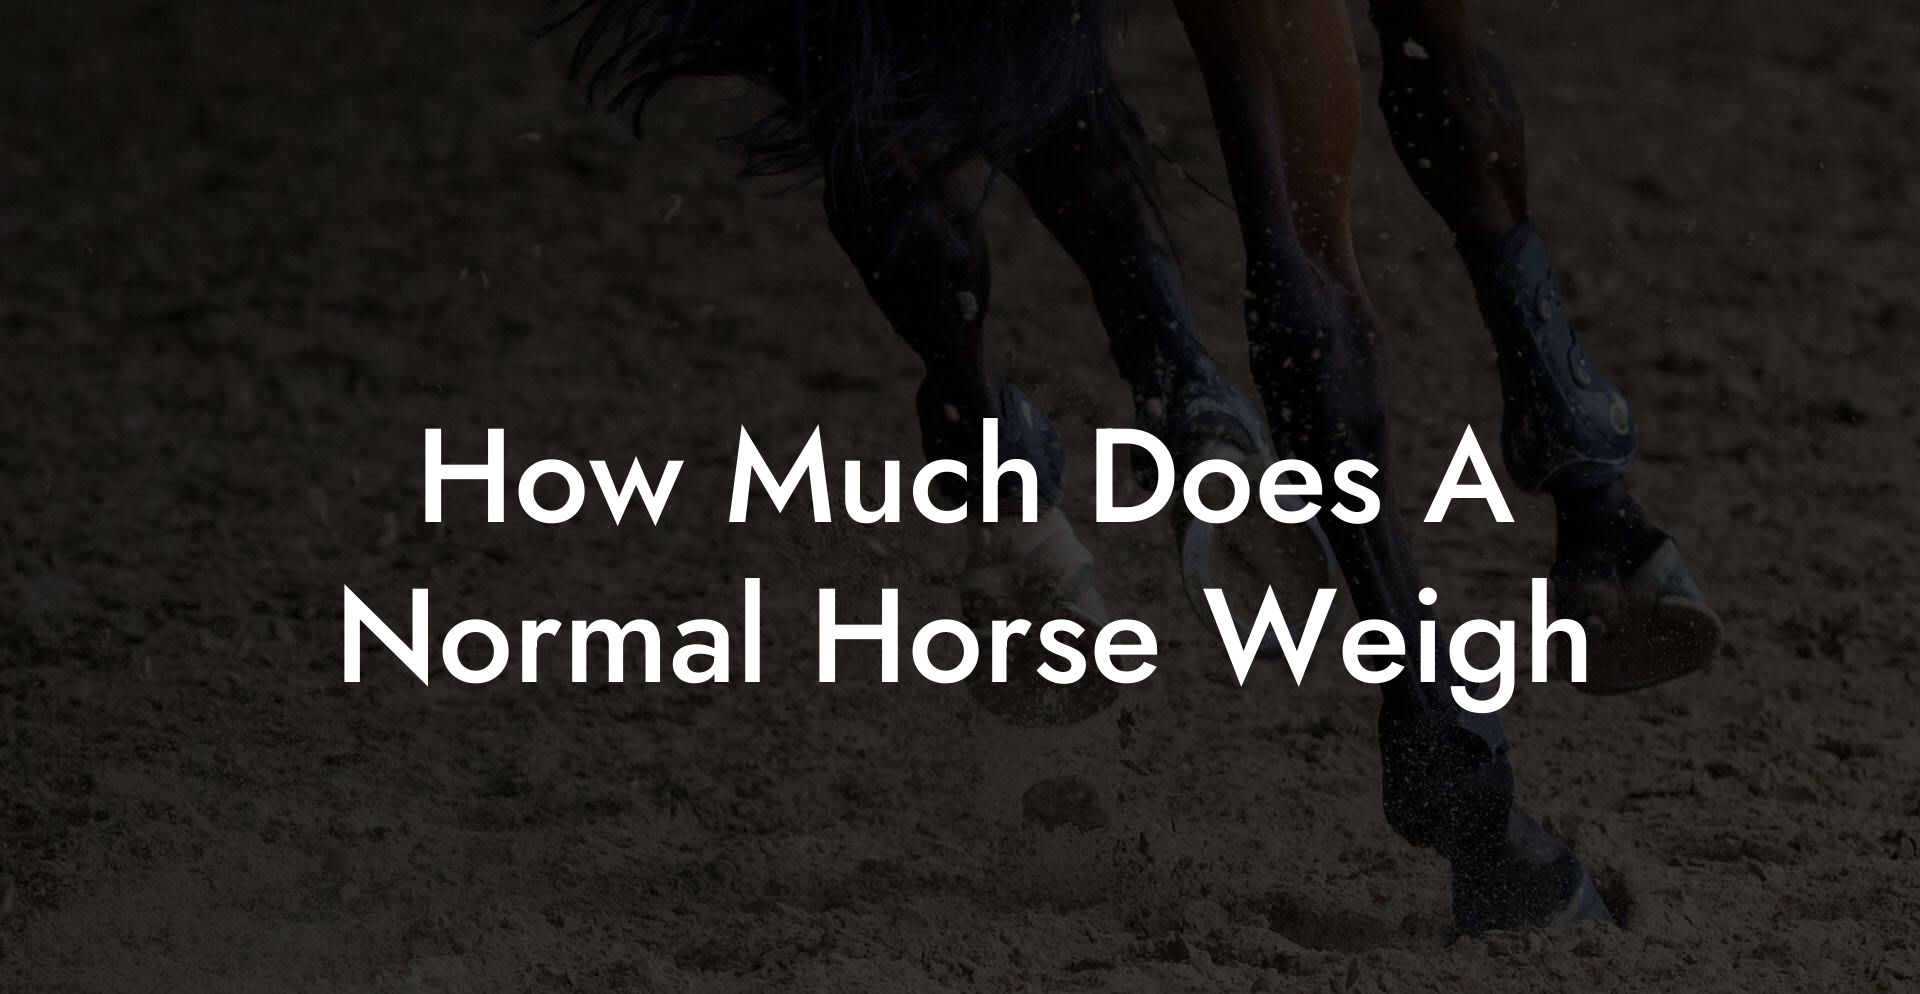 How Much Does A Normal Horse Weigh